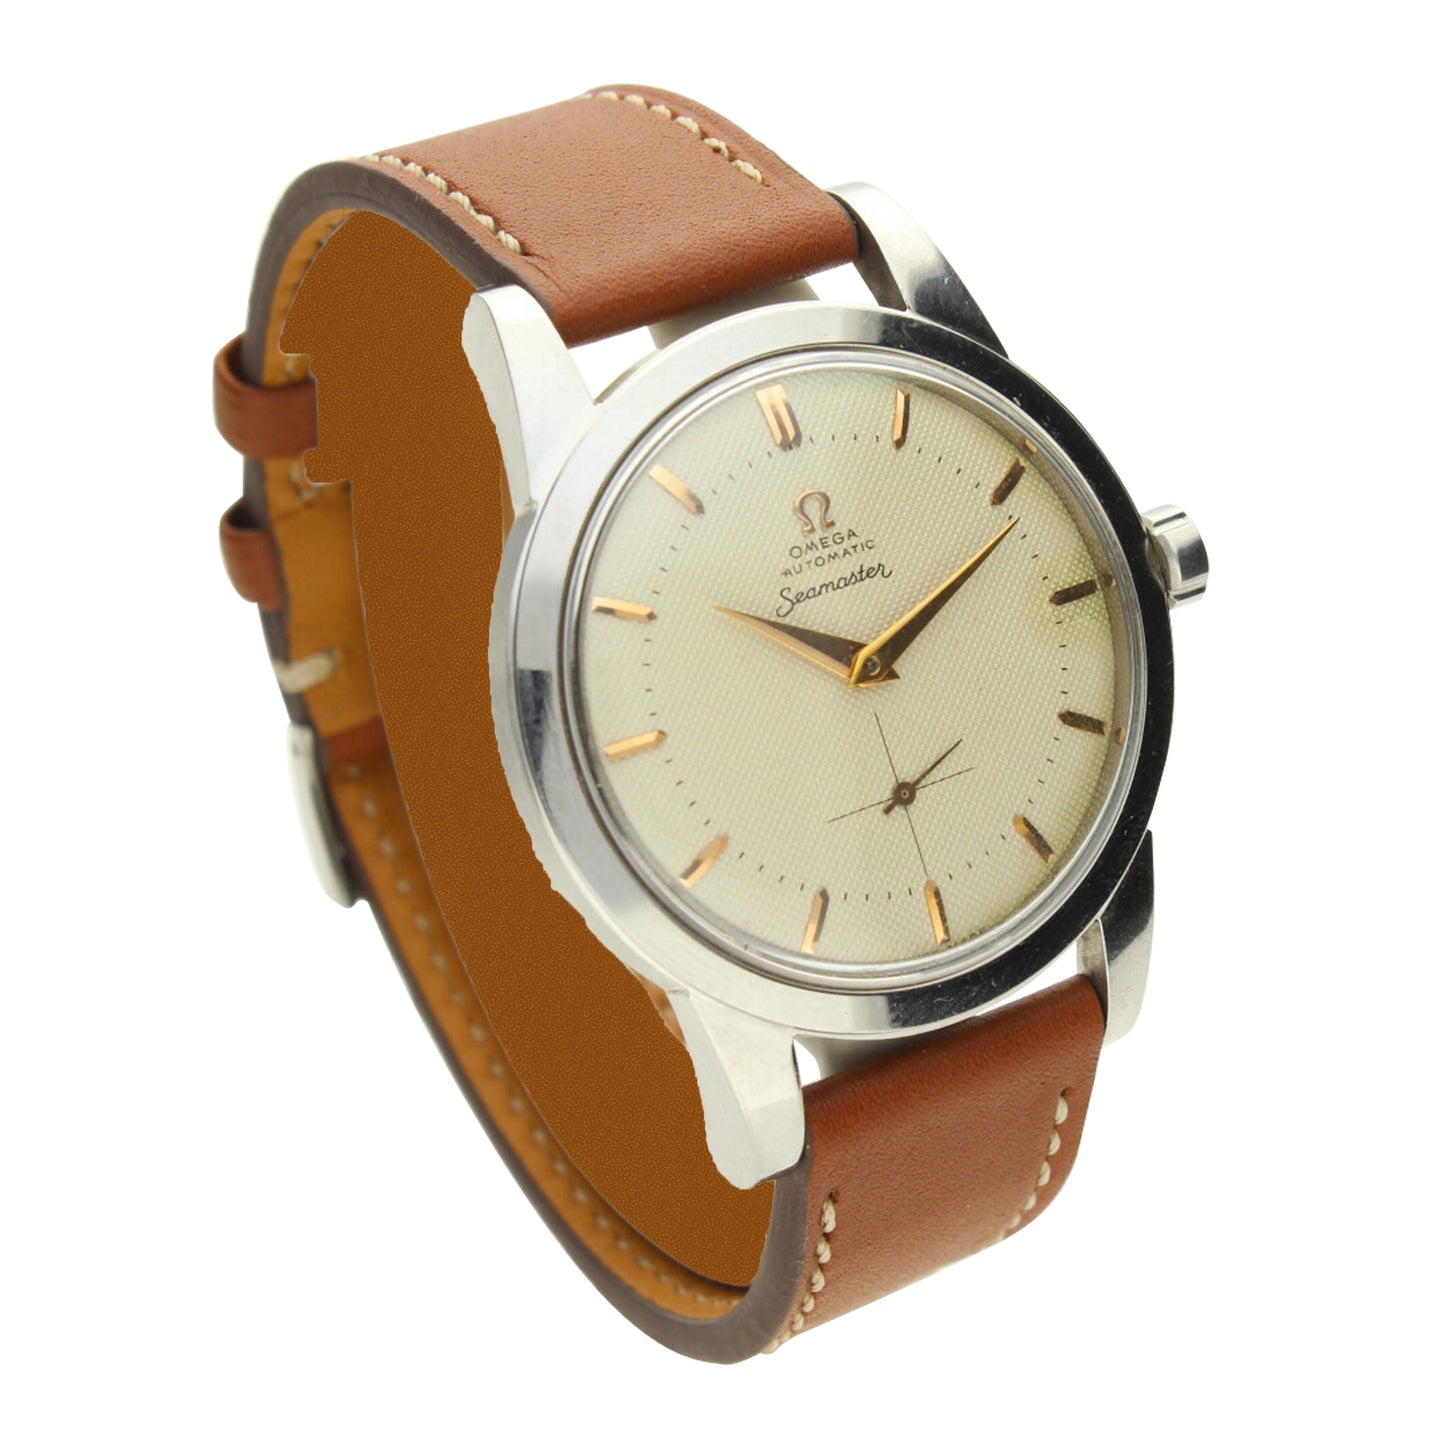 Stainless steel Seamaster bumper automatic wristwatch. Made 1953